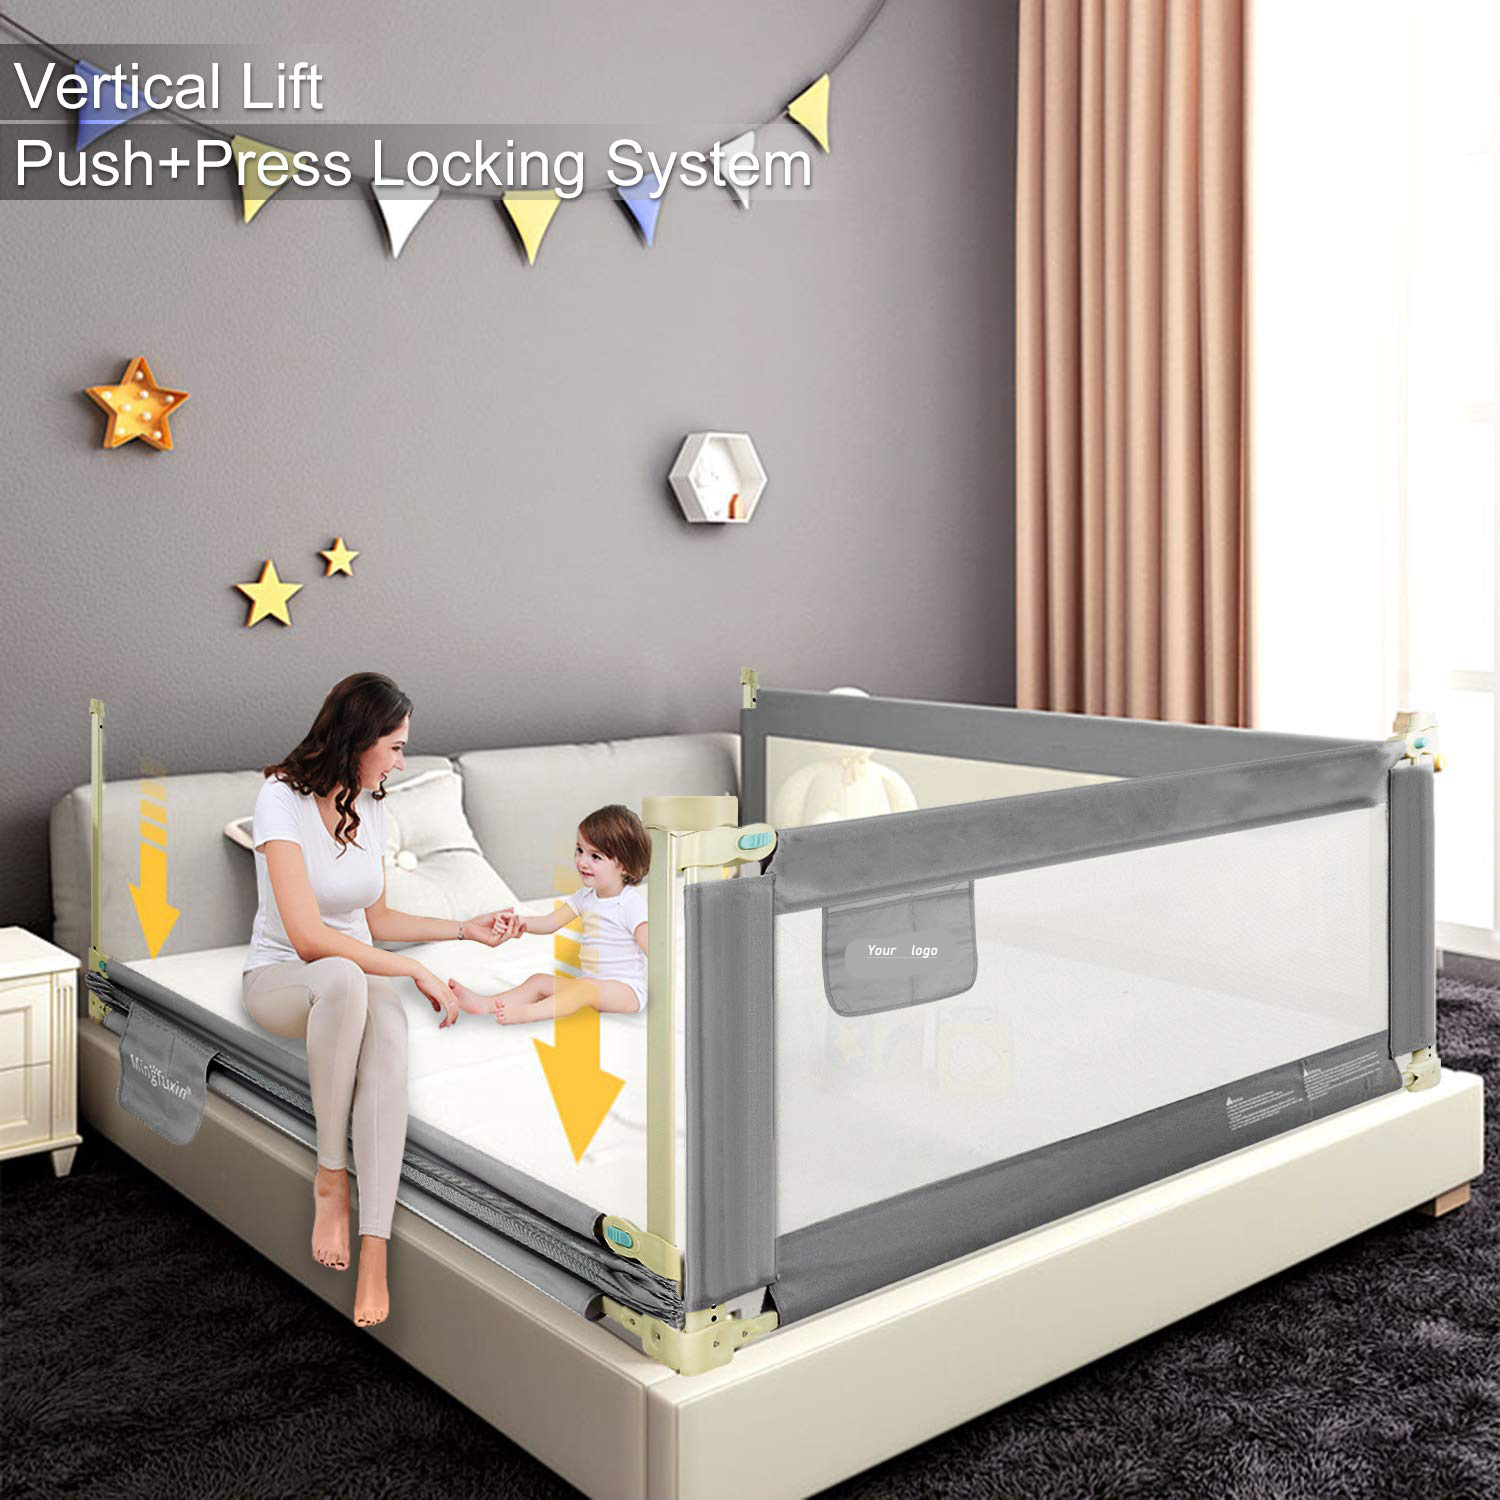 Acplaypen.com Extra Long Safety Bed Rails for Toddlers, Vertical/twosides  Lifting Foldable Bed Guardrail Crib Bed Rails Guard for Kids Twin, Double, Queen & King Size with Dual Lock- Single Side 70"